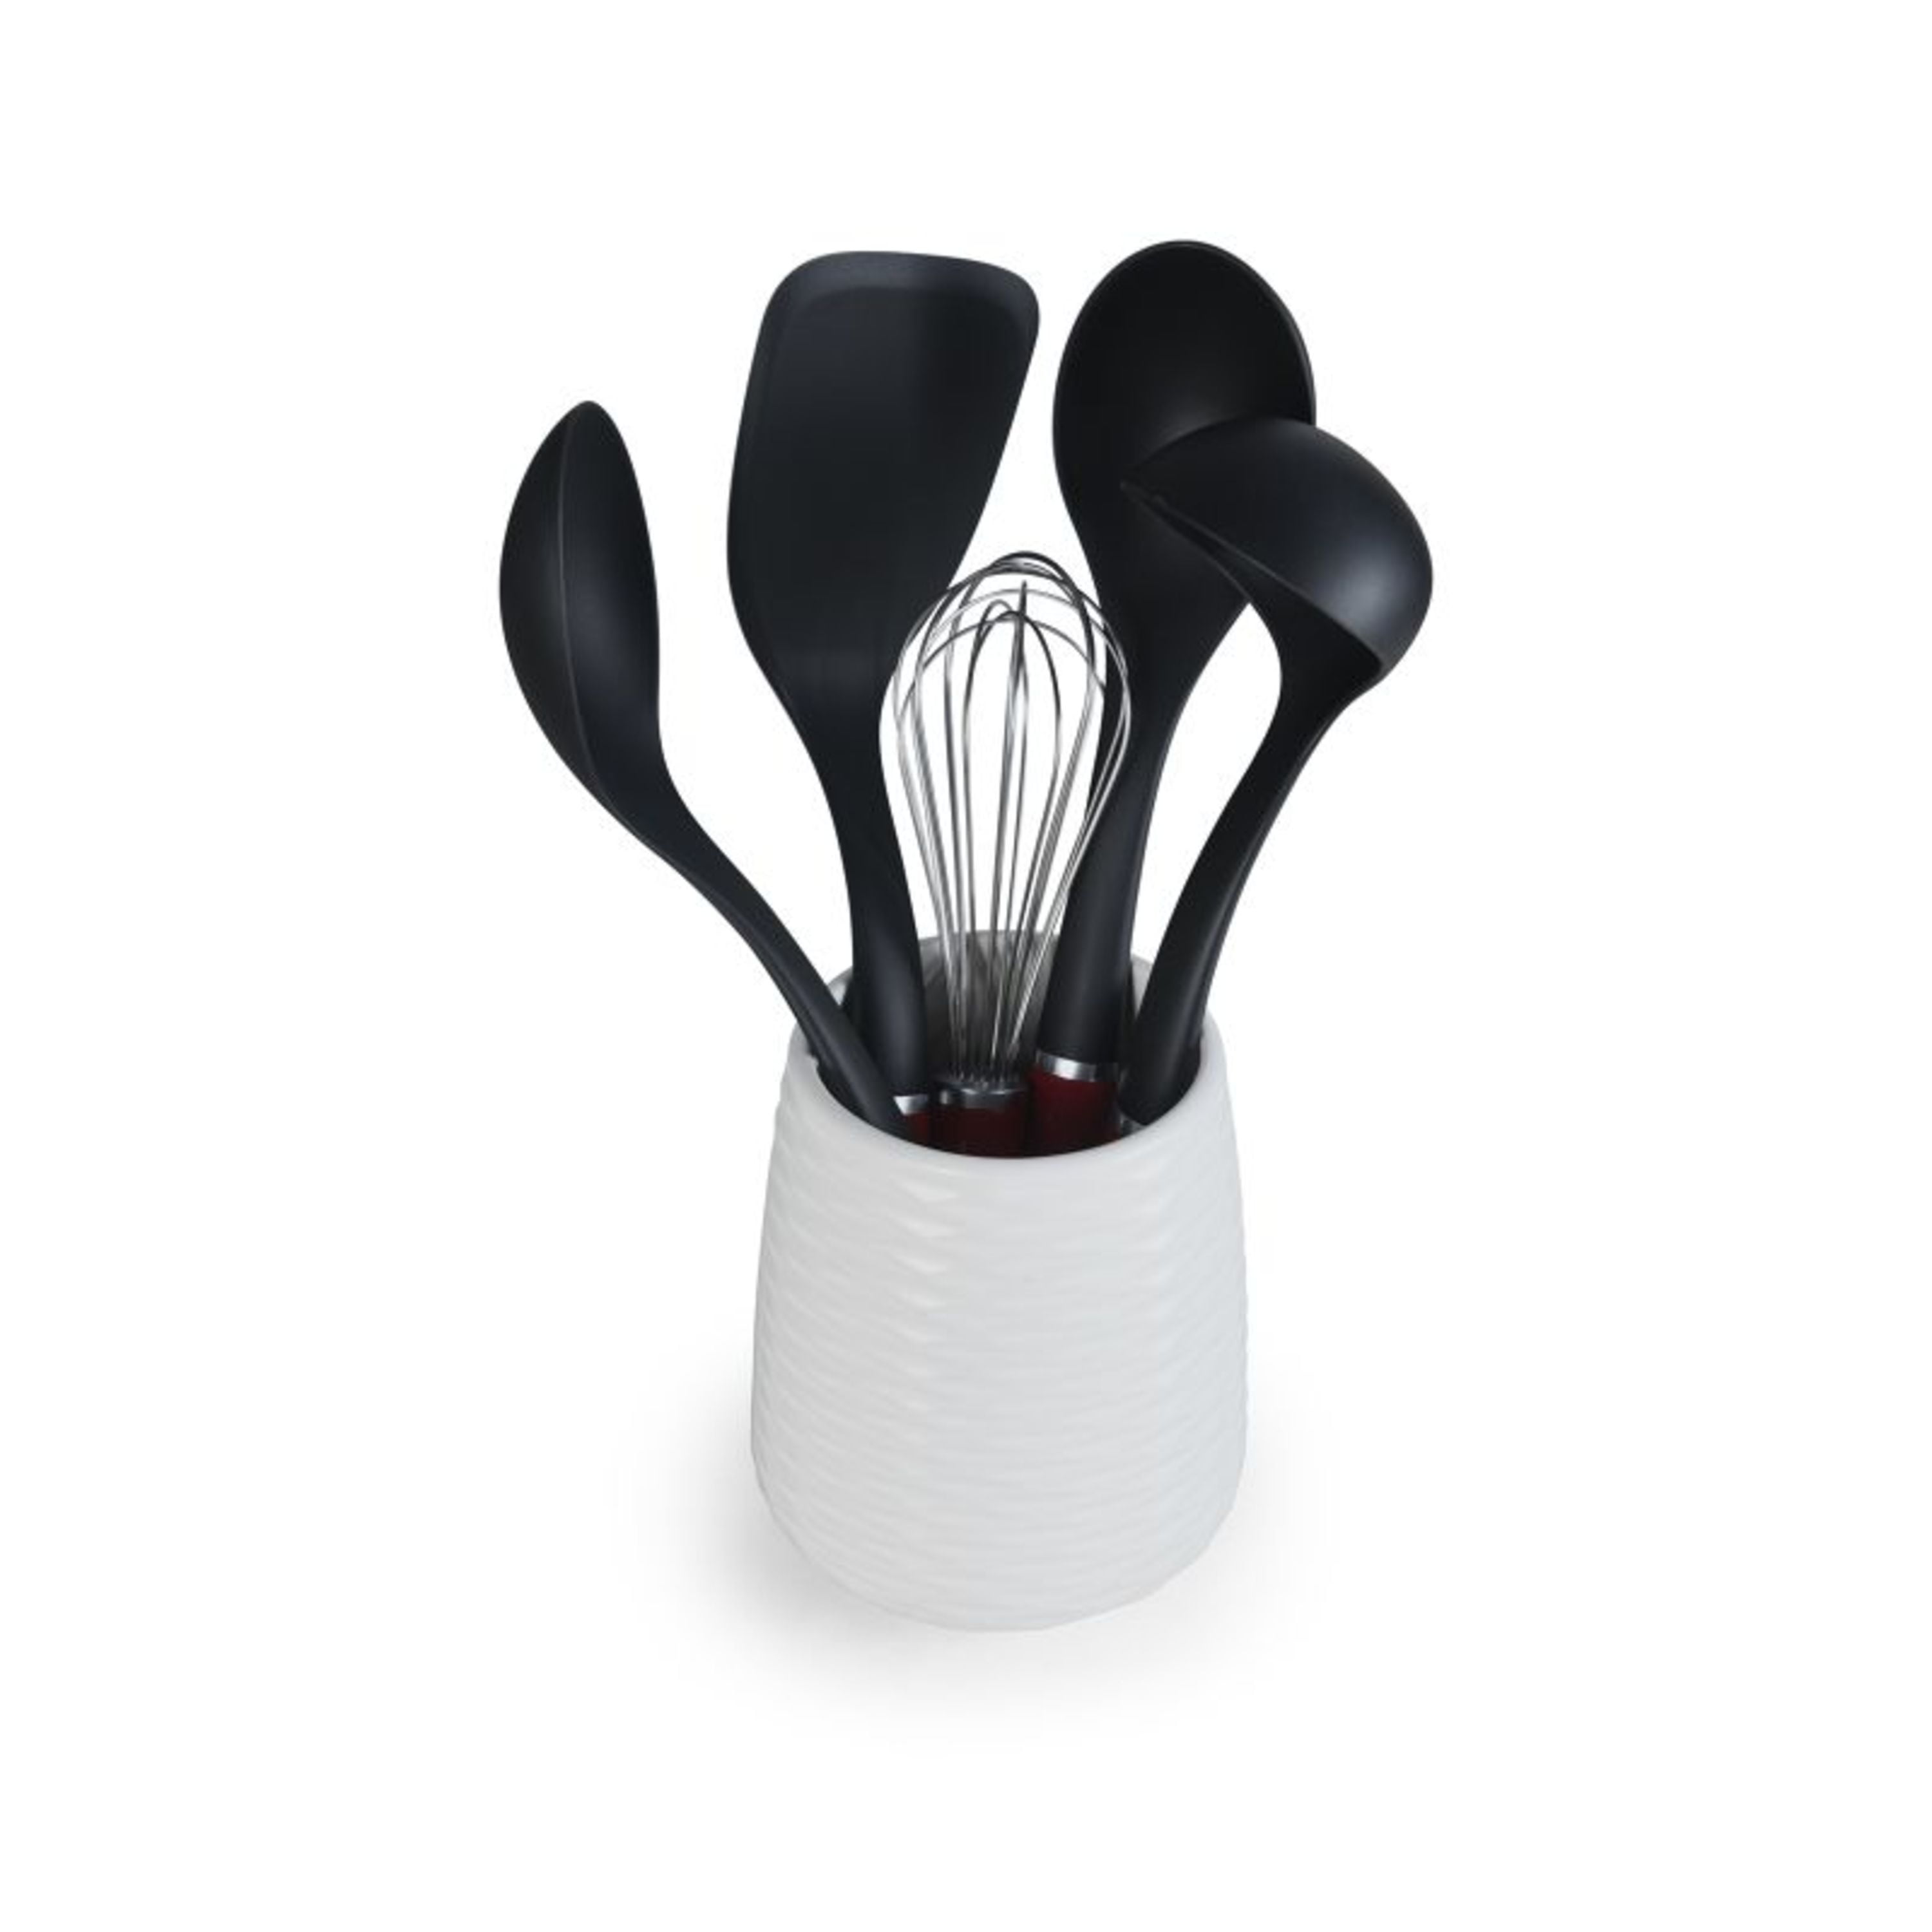 KitchenAid has a new line of cooking utensils exclusive to Walmart